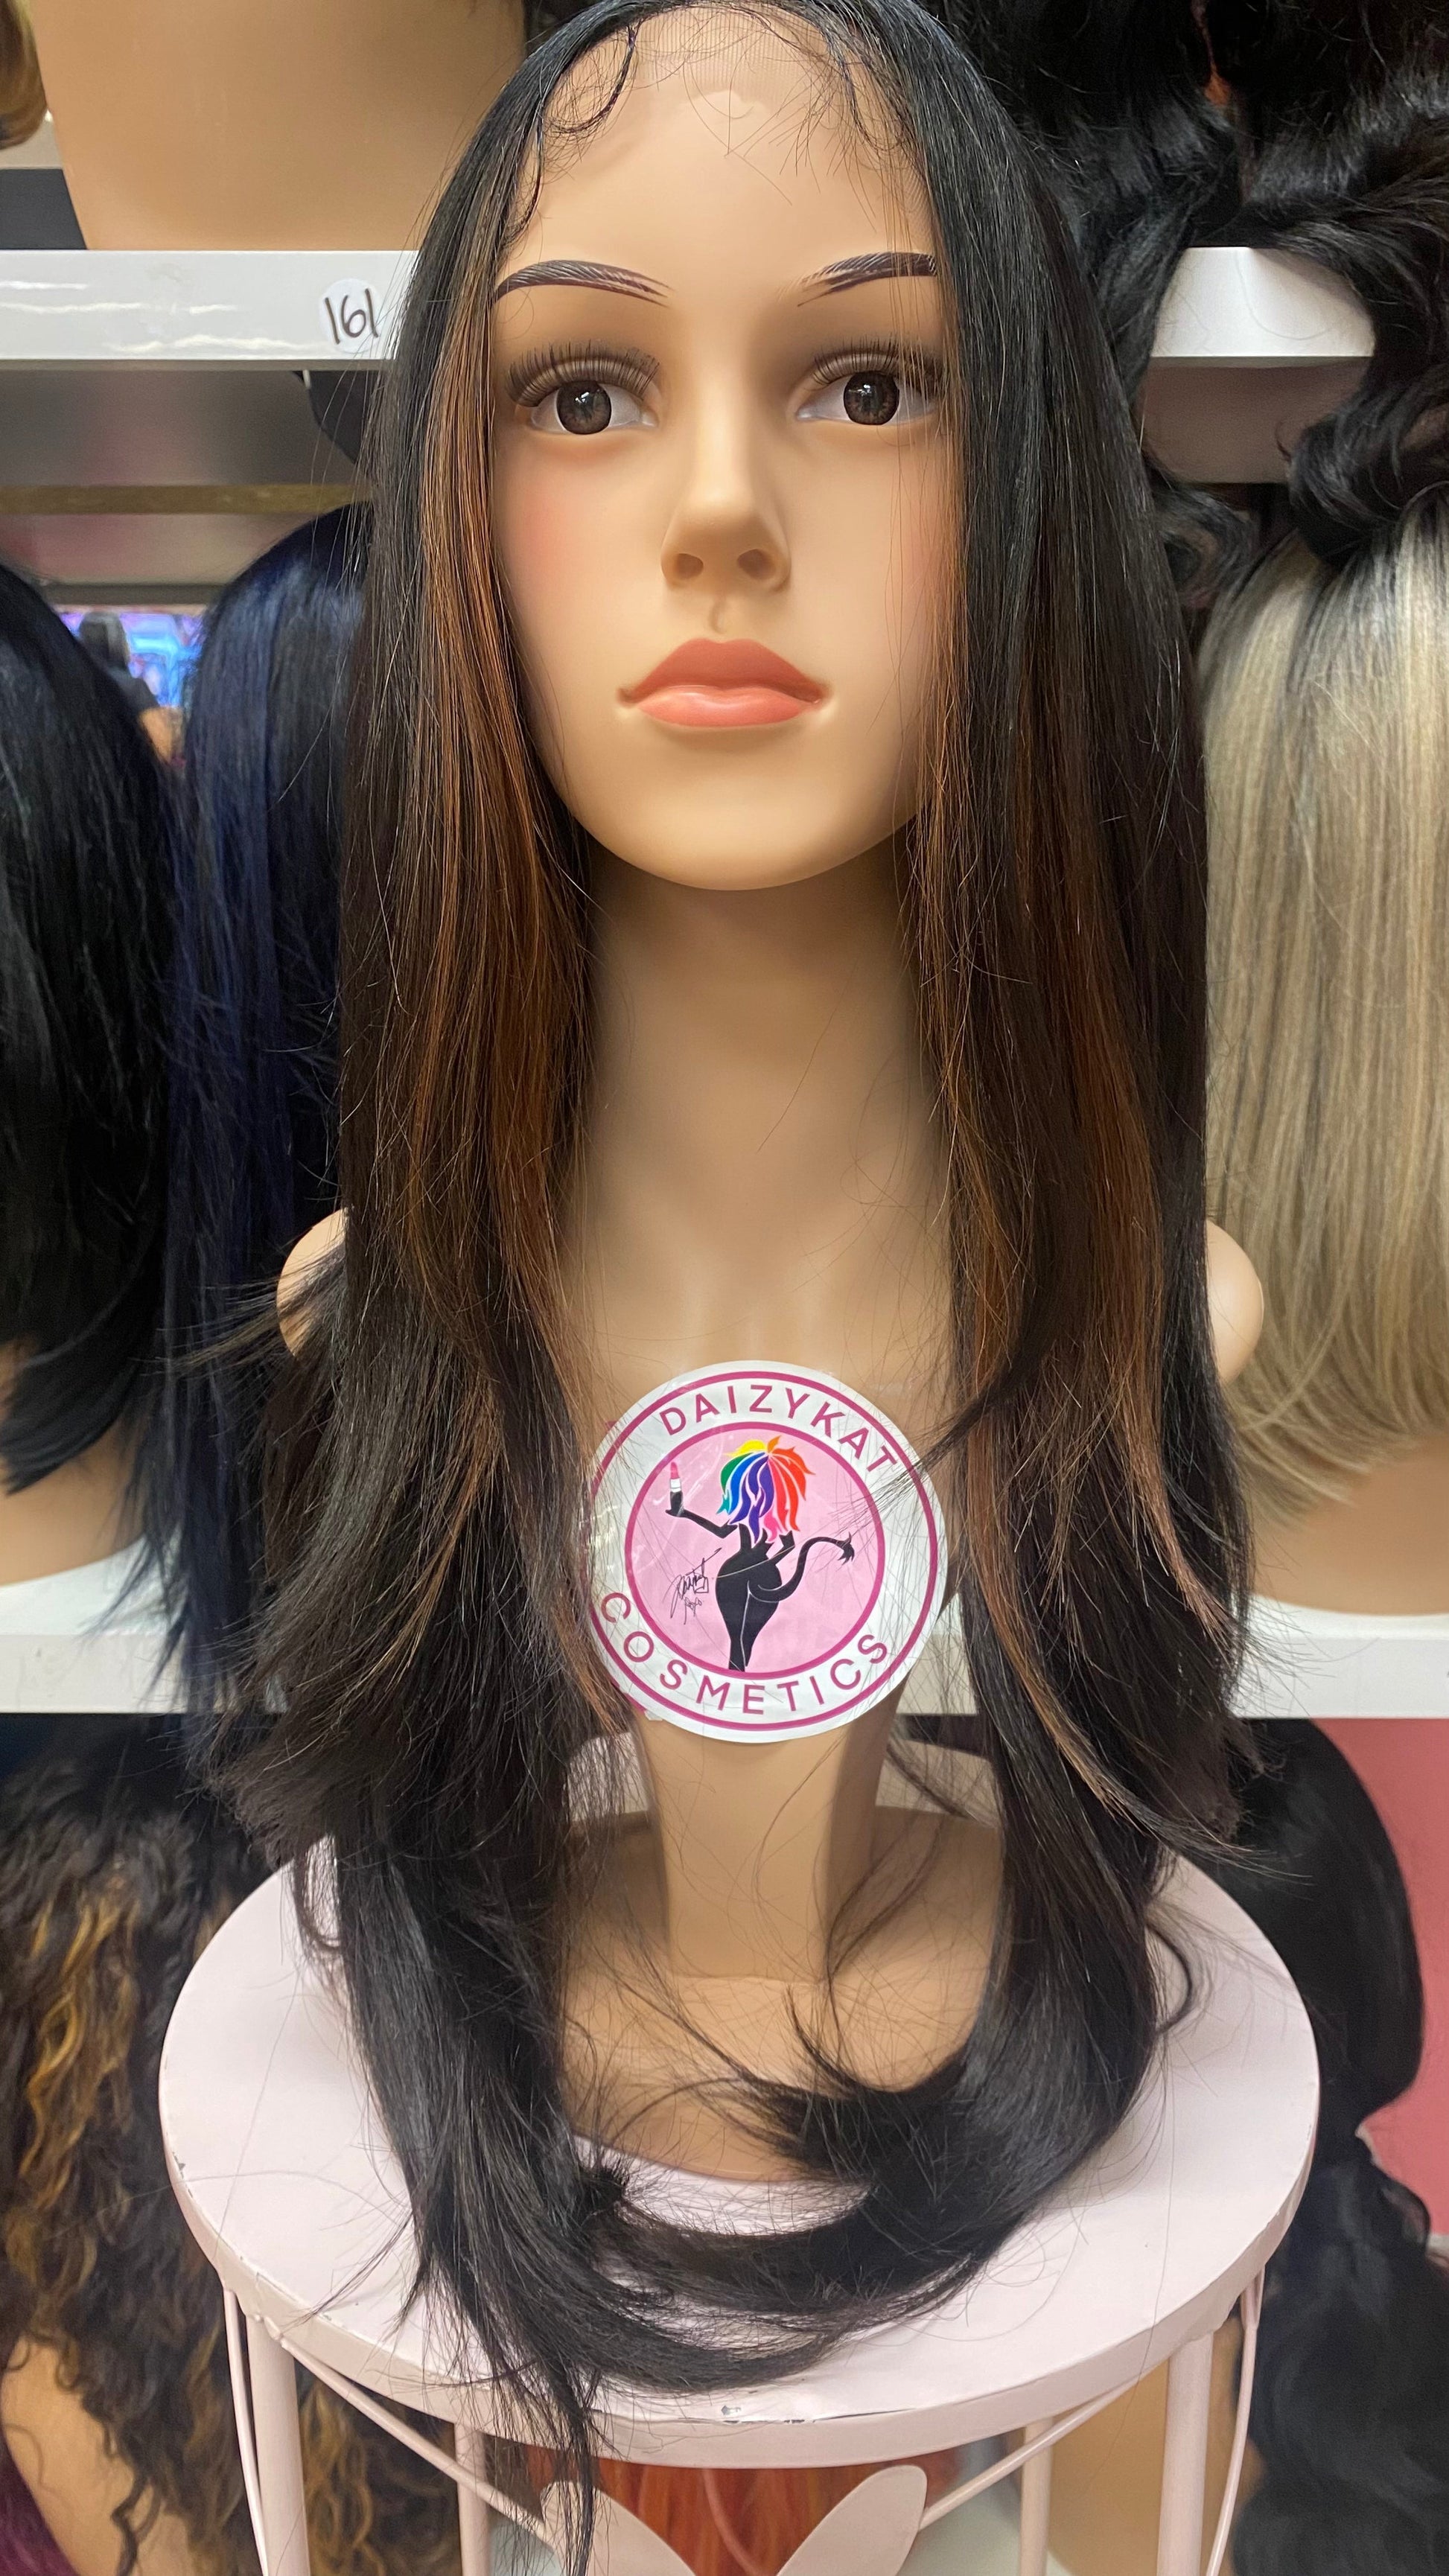 165 KAREN - Middle Part Lace Front Wig - 1B/30 - DaizyKat Cosmetics 165 KAREN - Middle Part Lace Front Wig - 1B/30 DaizyKat Cosmetics Wigs